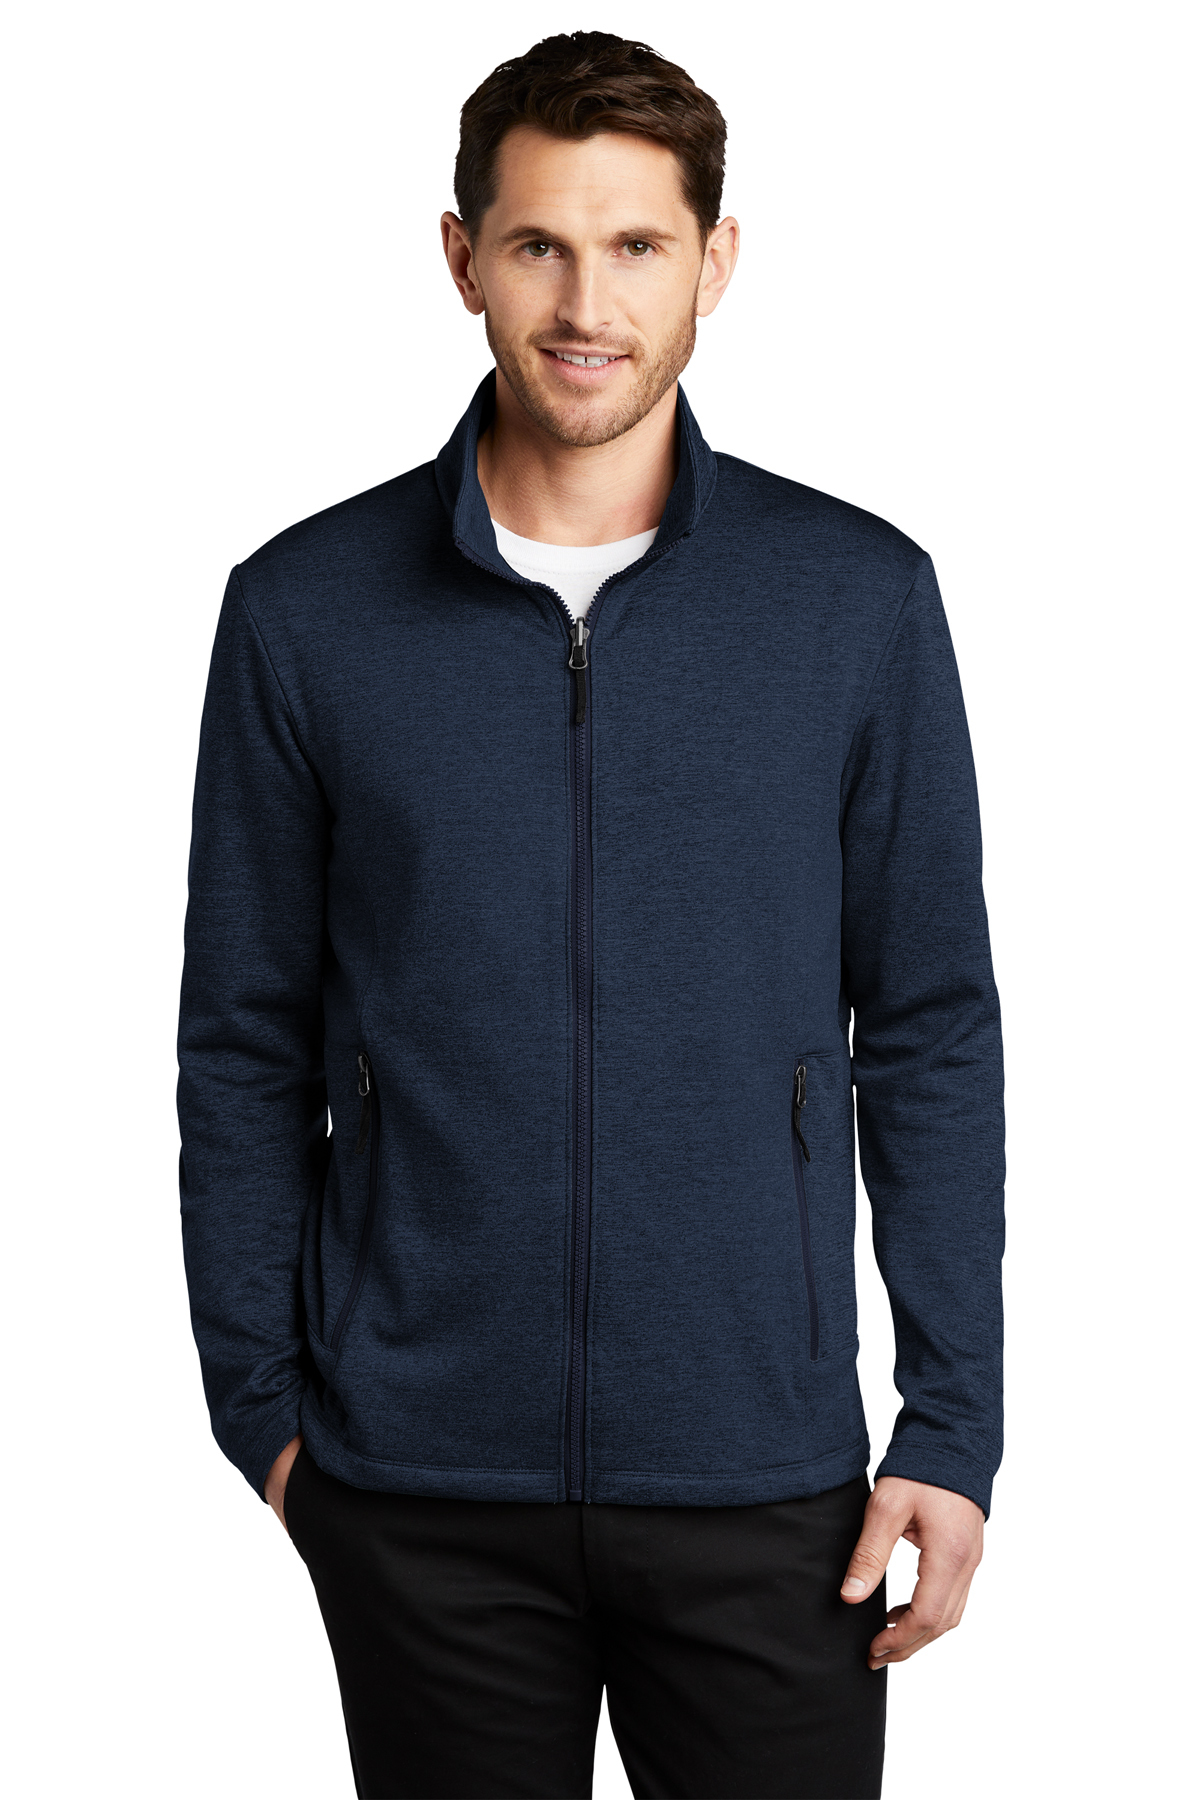 click to view River Blue Navy Heather